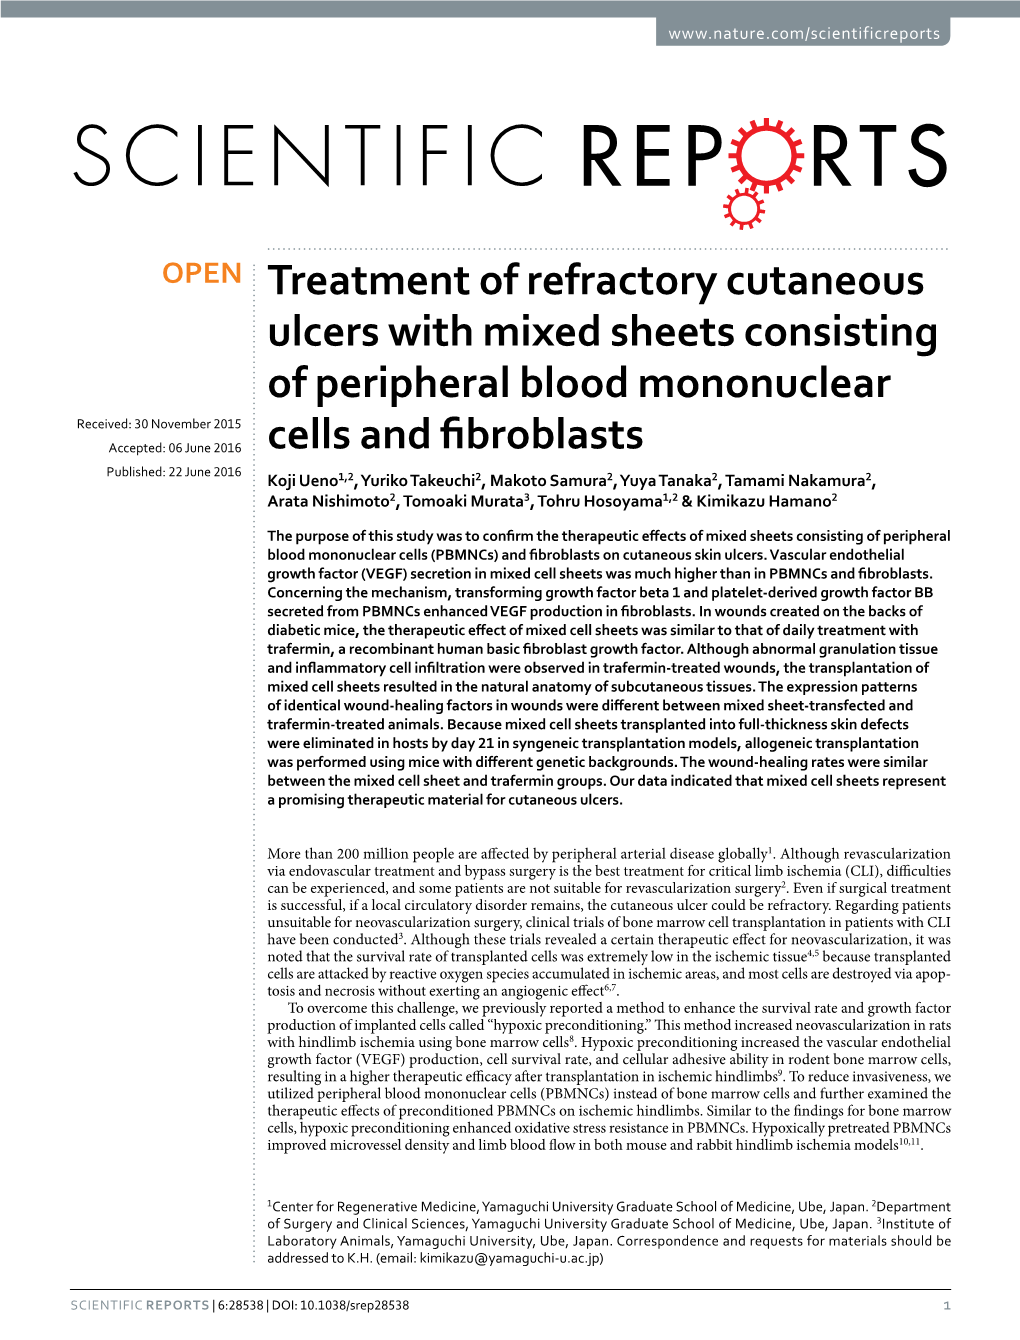 Treatment of Refractory Cutaneous Ulcers with Mixed Sheets Consisting